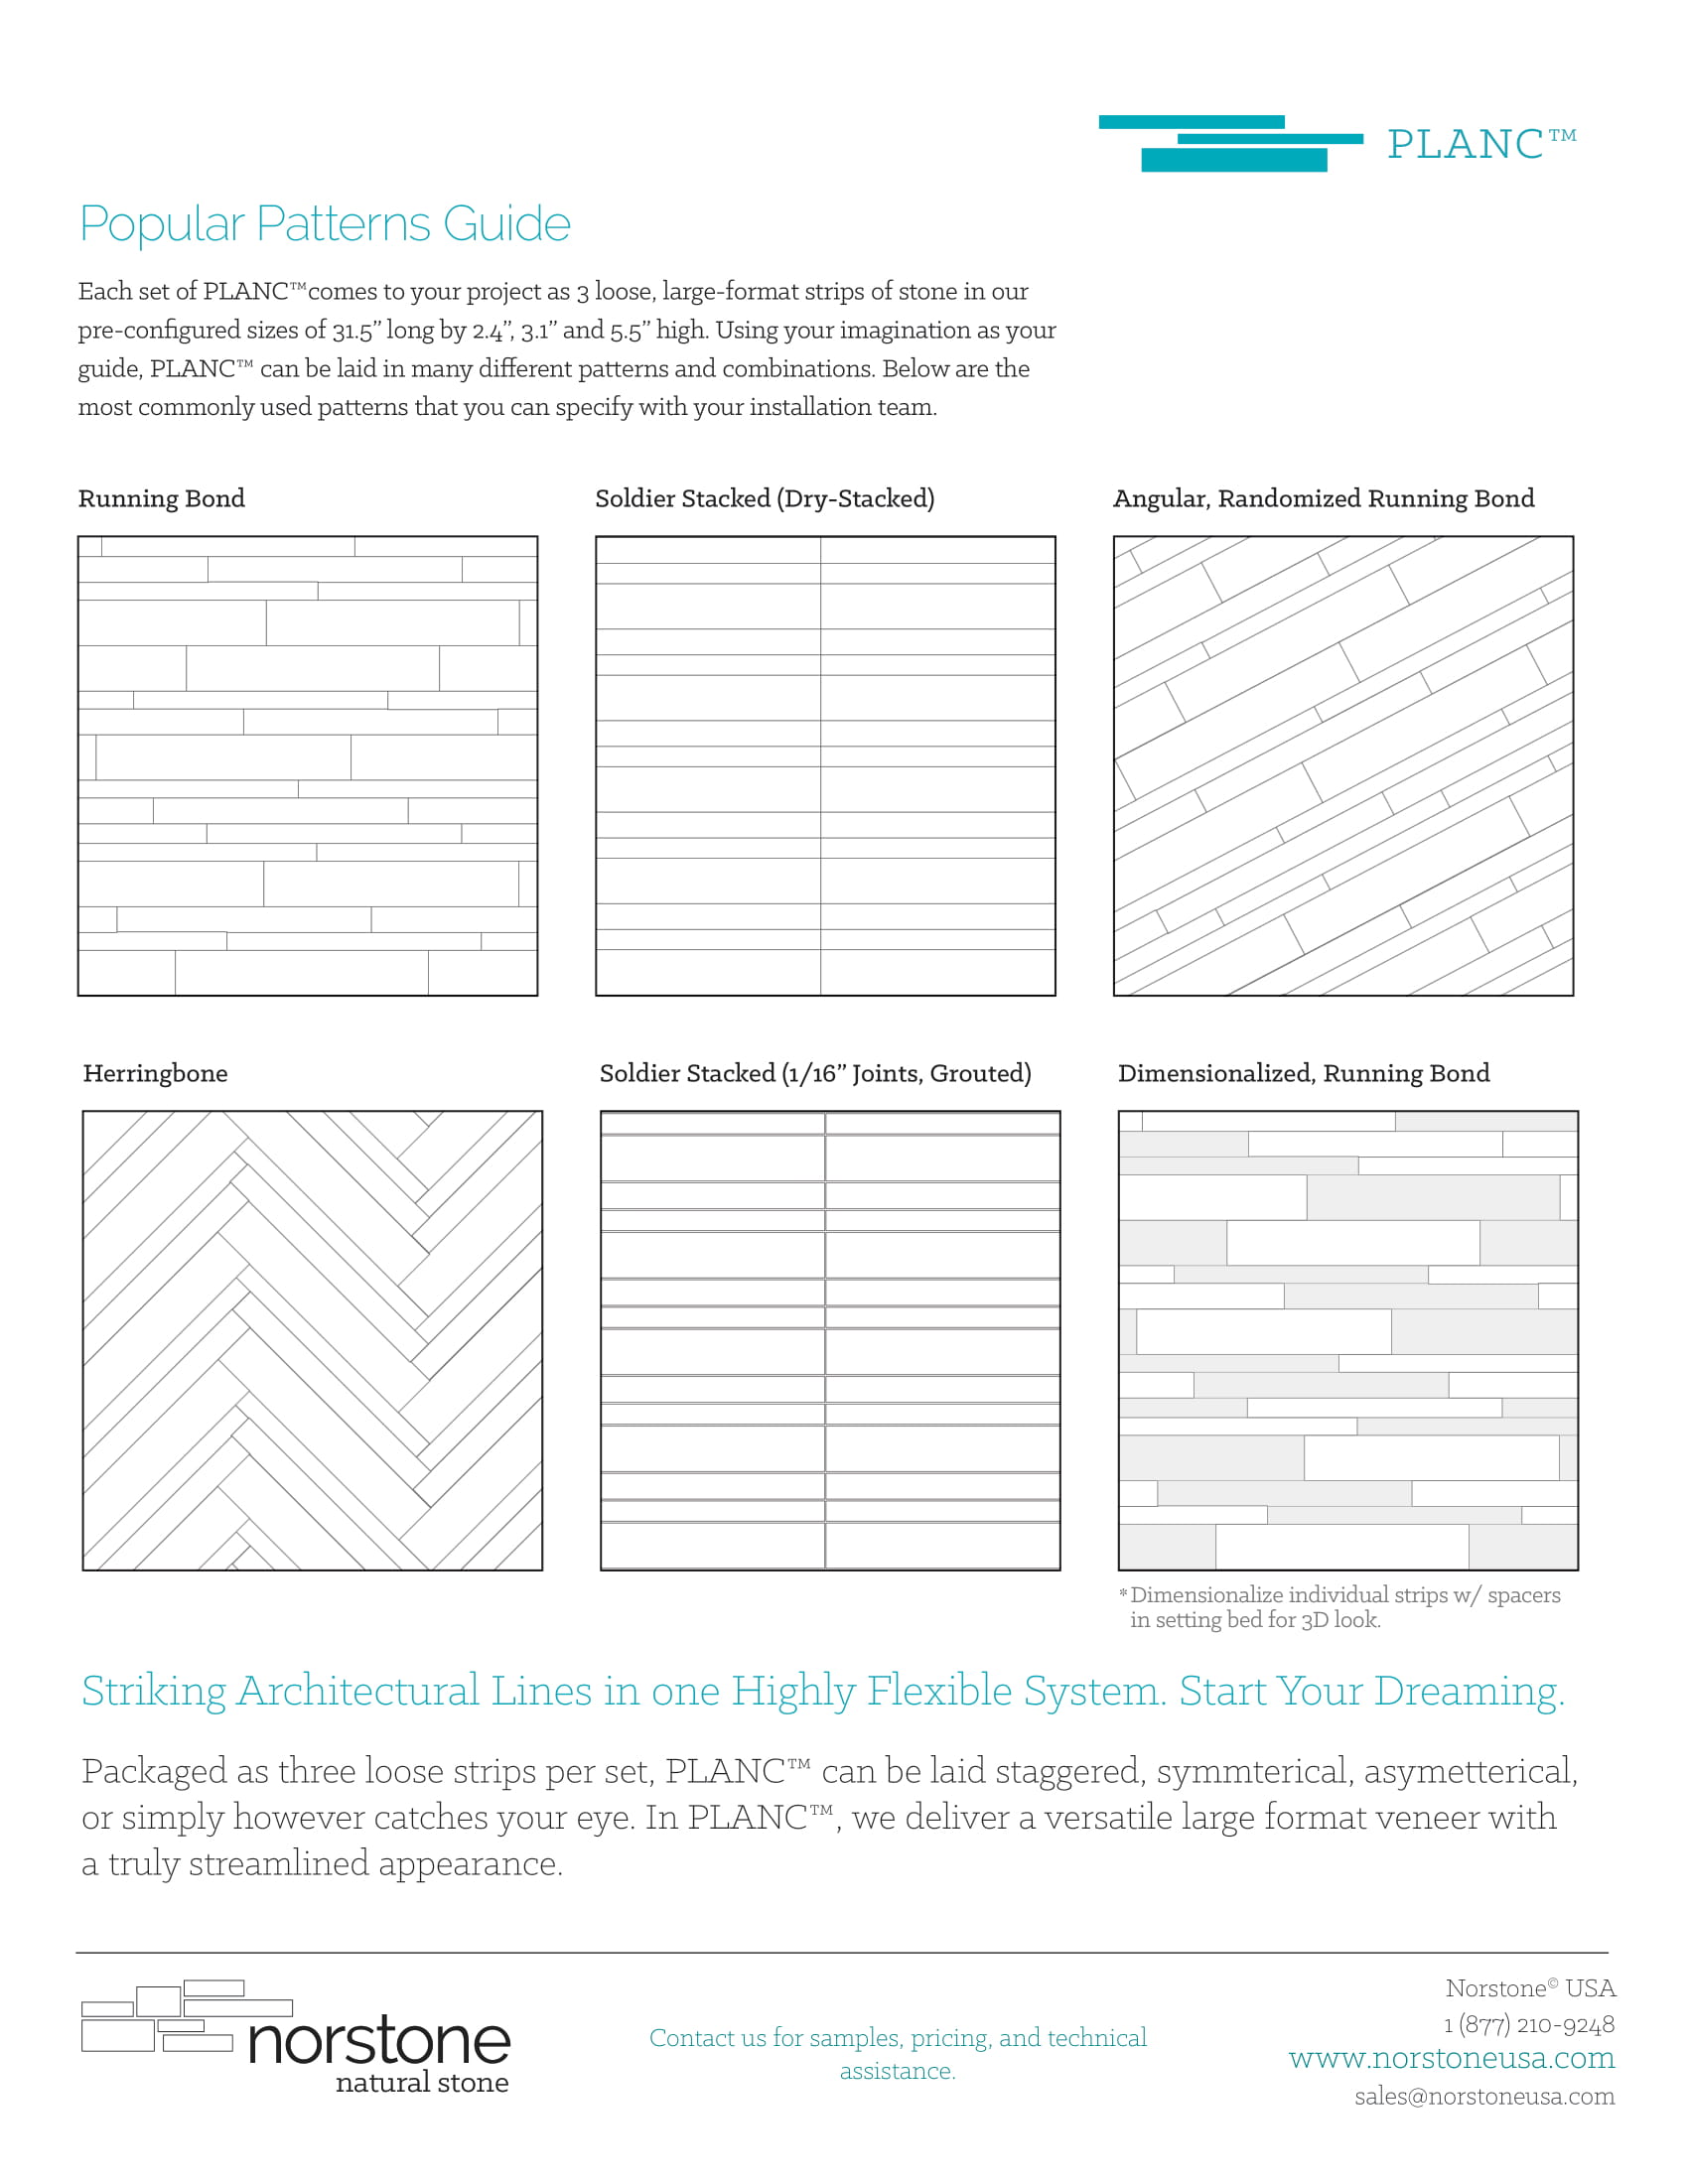 Norstone Pattern Guide for the Planc Large Format Tile Series Product